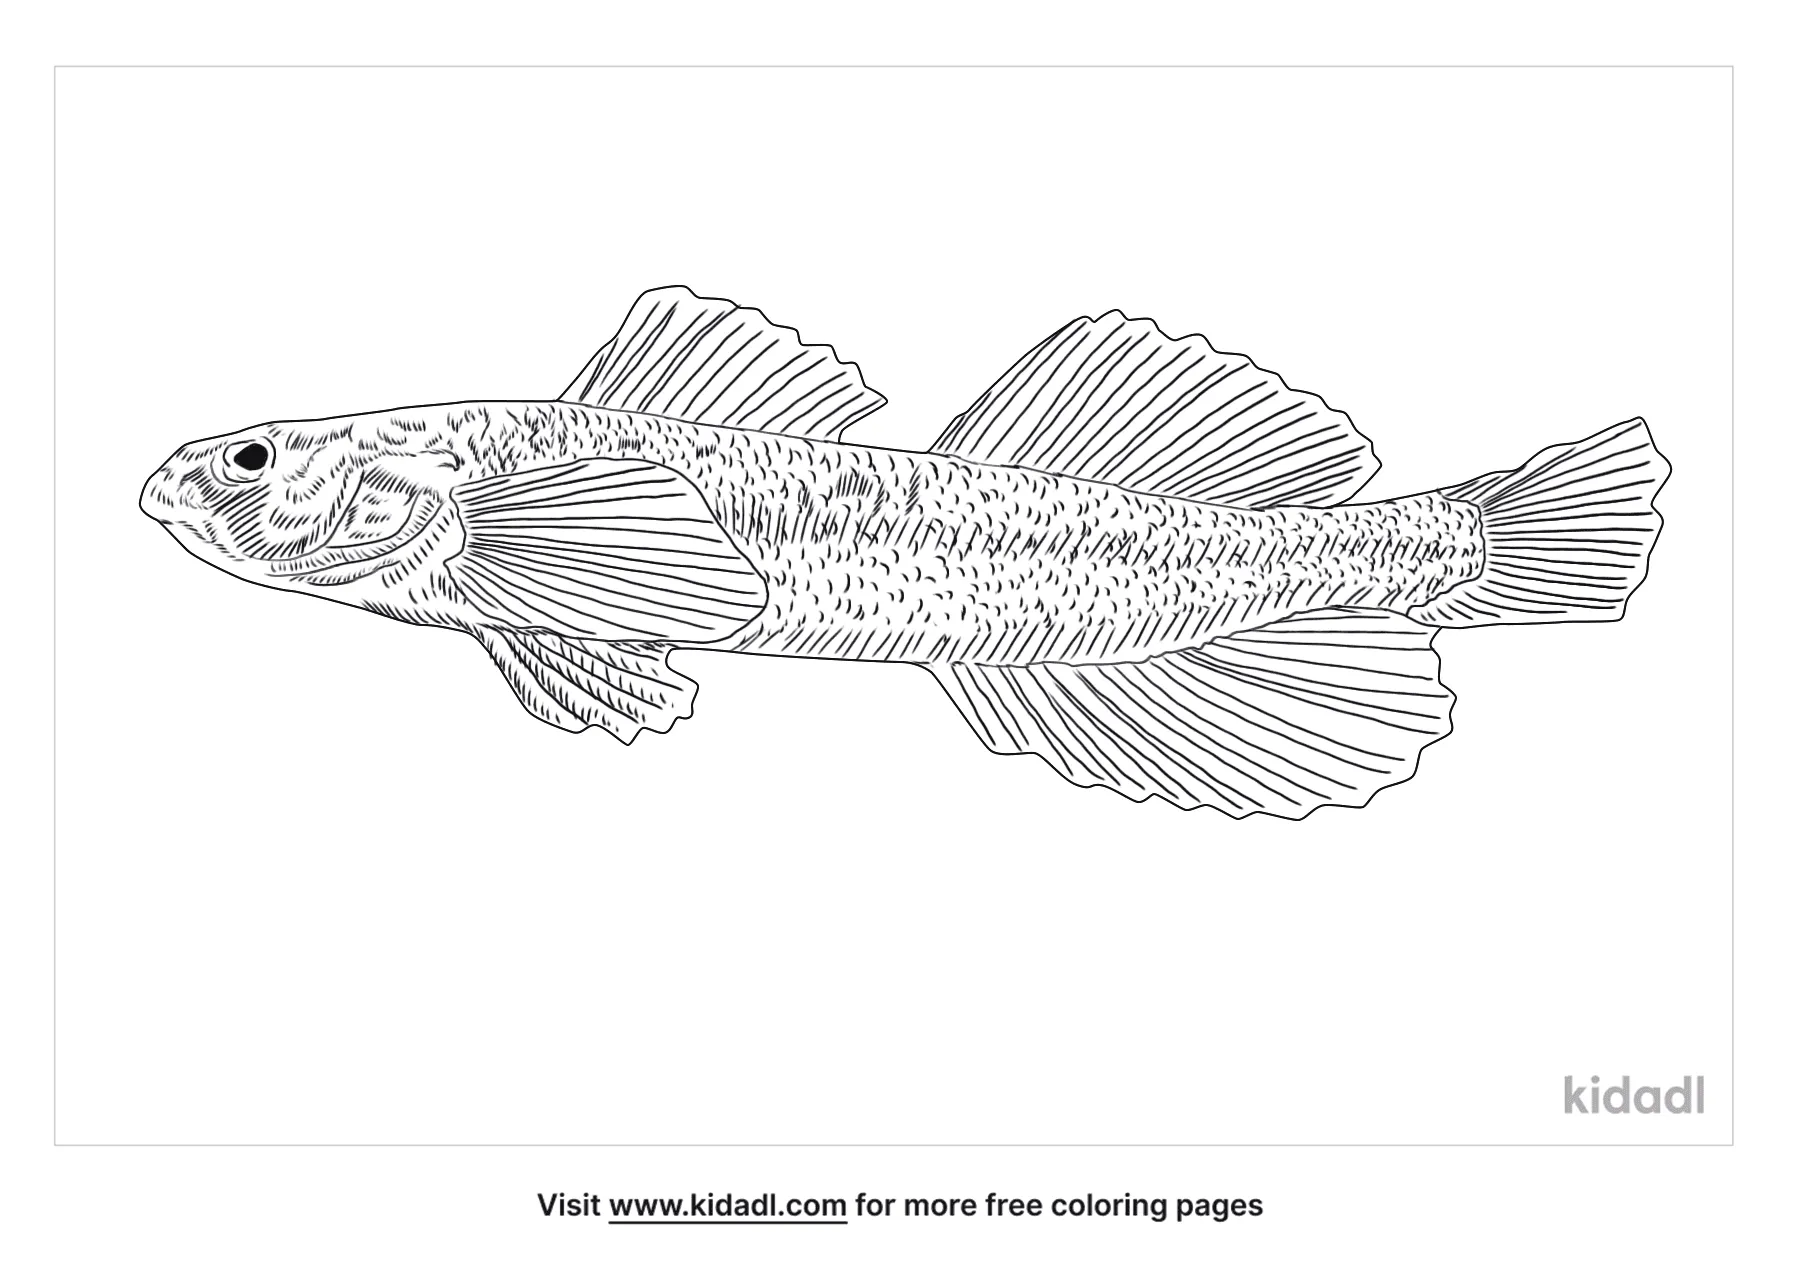 Snail Darter Coloring Page